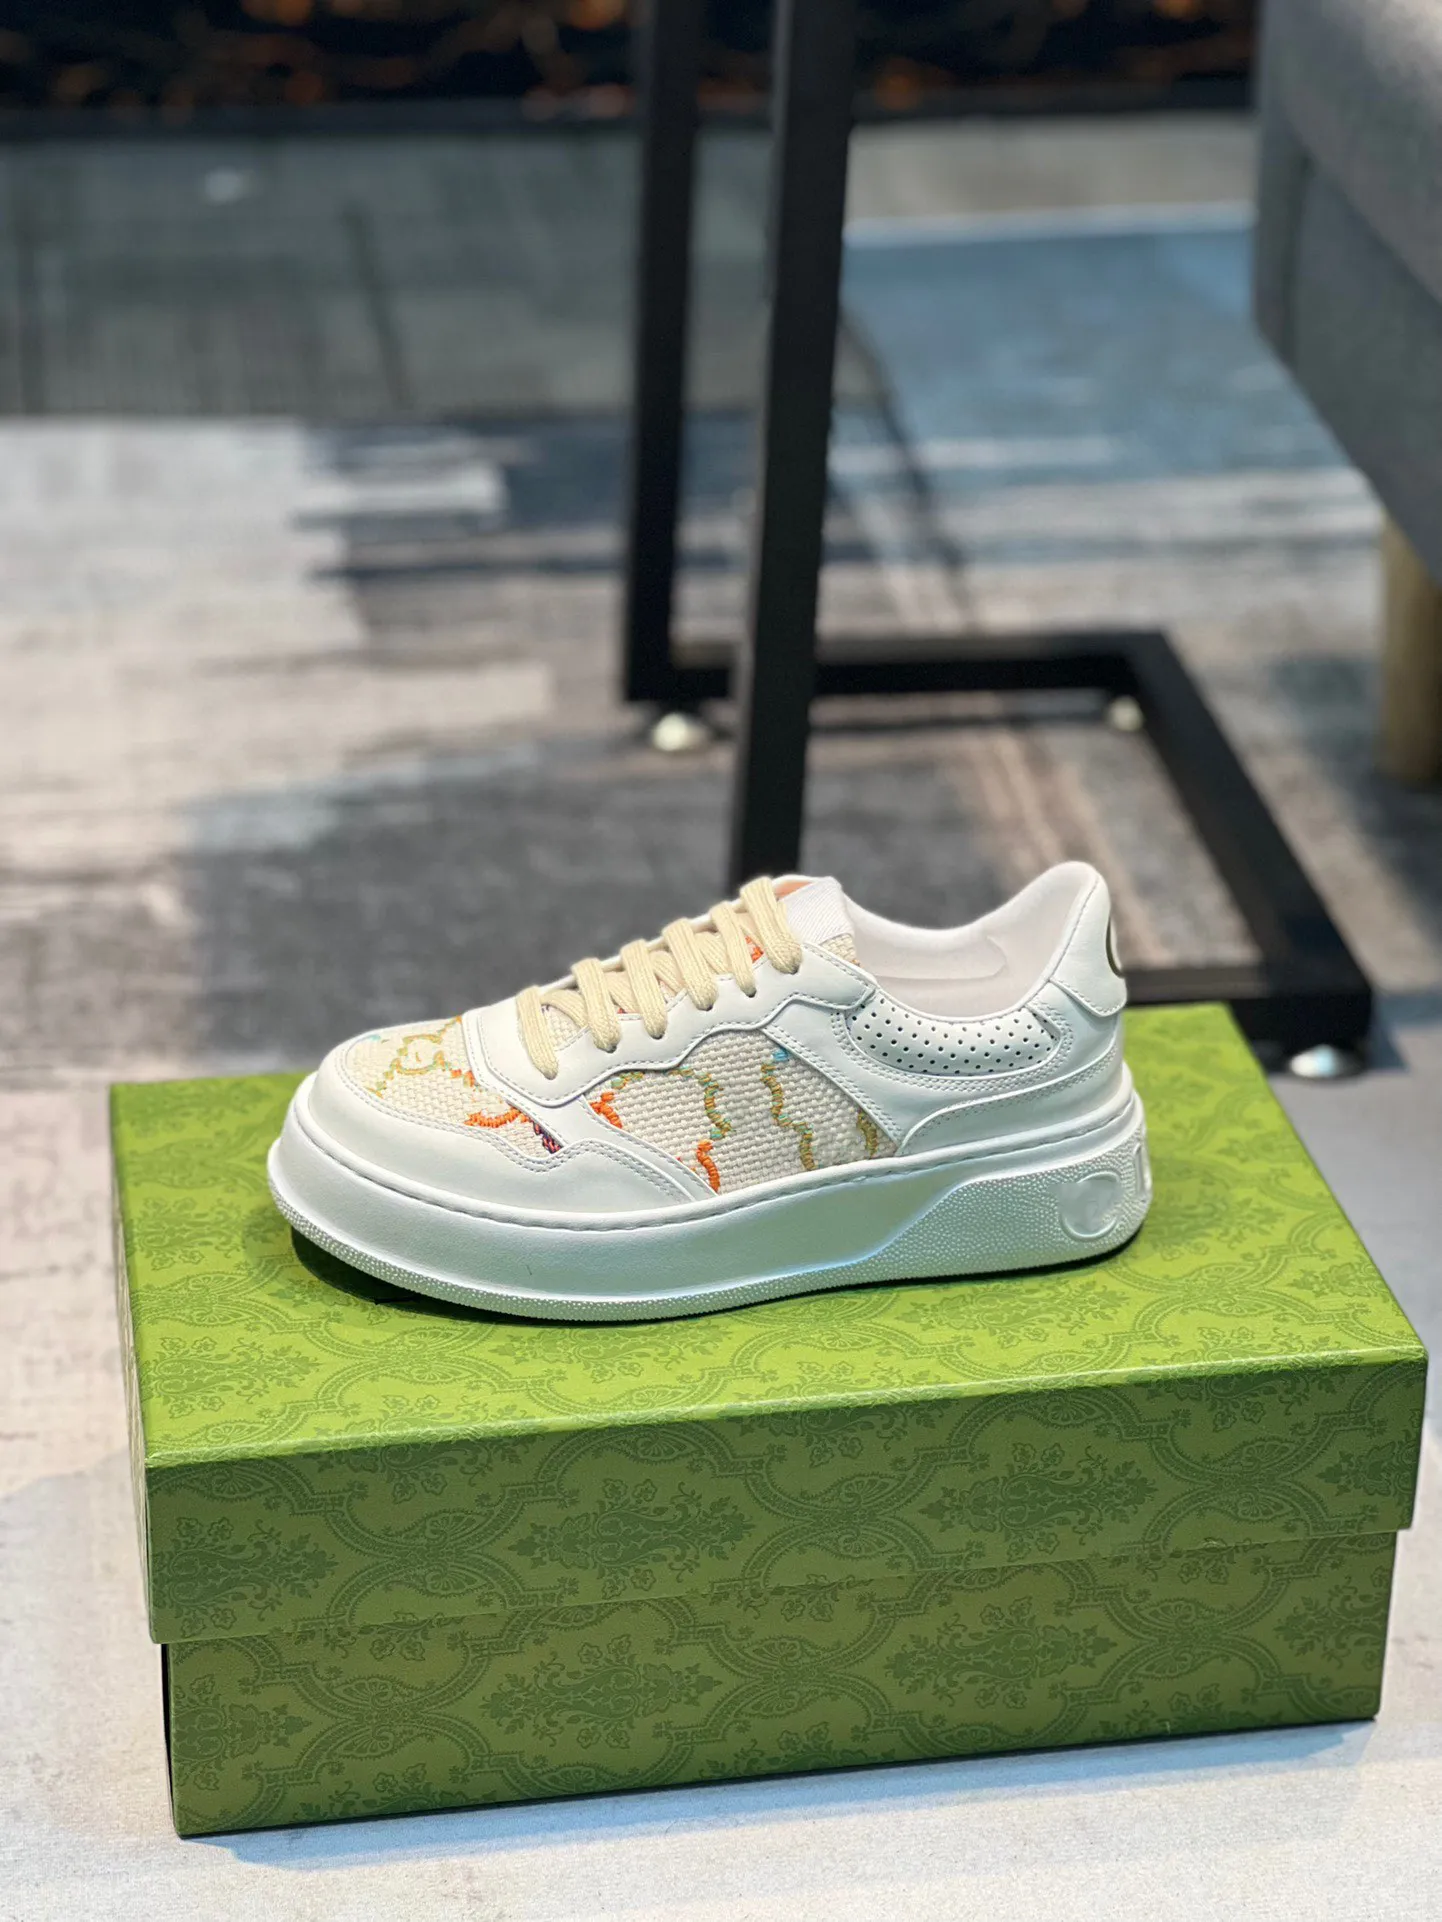 Buy Gola womens Indiana sneakers in off white/baltic online at gola.